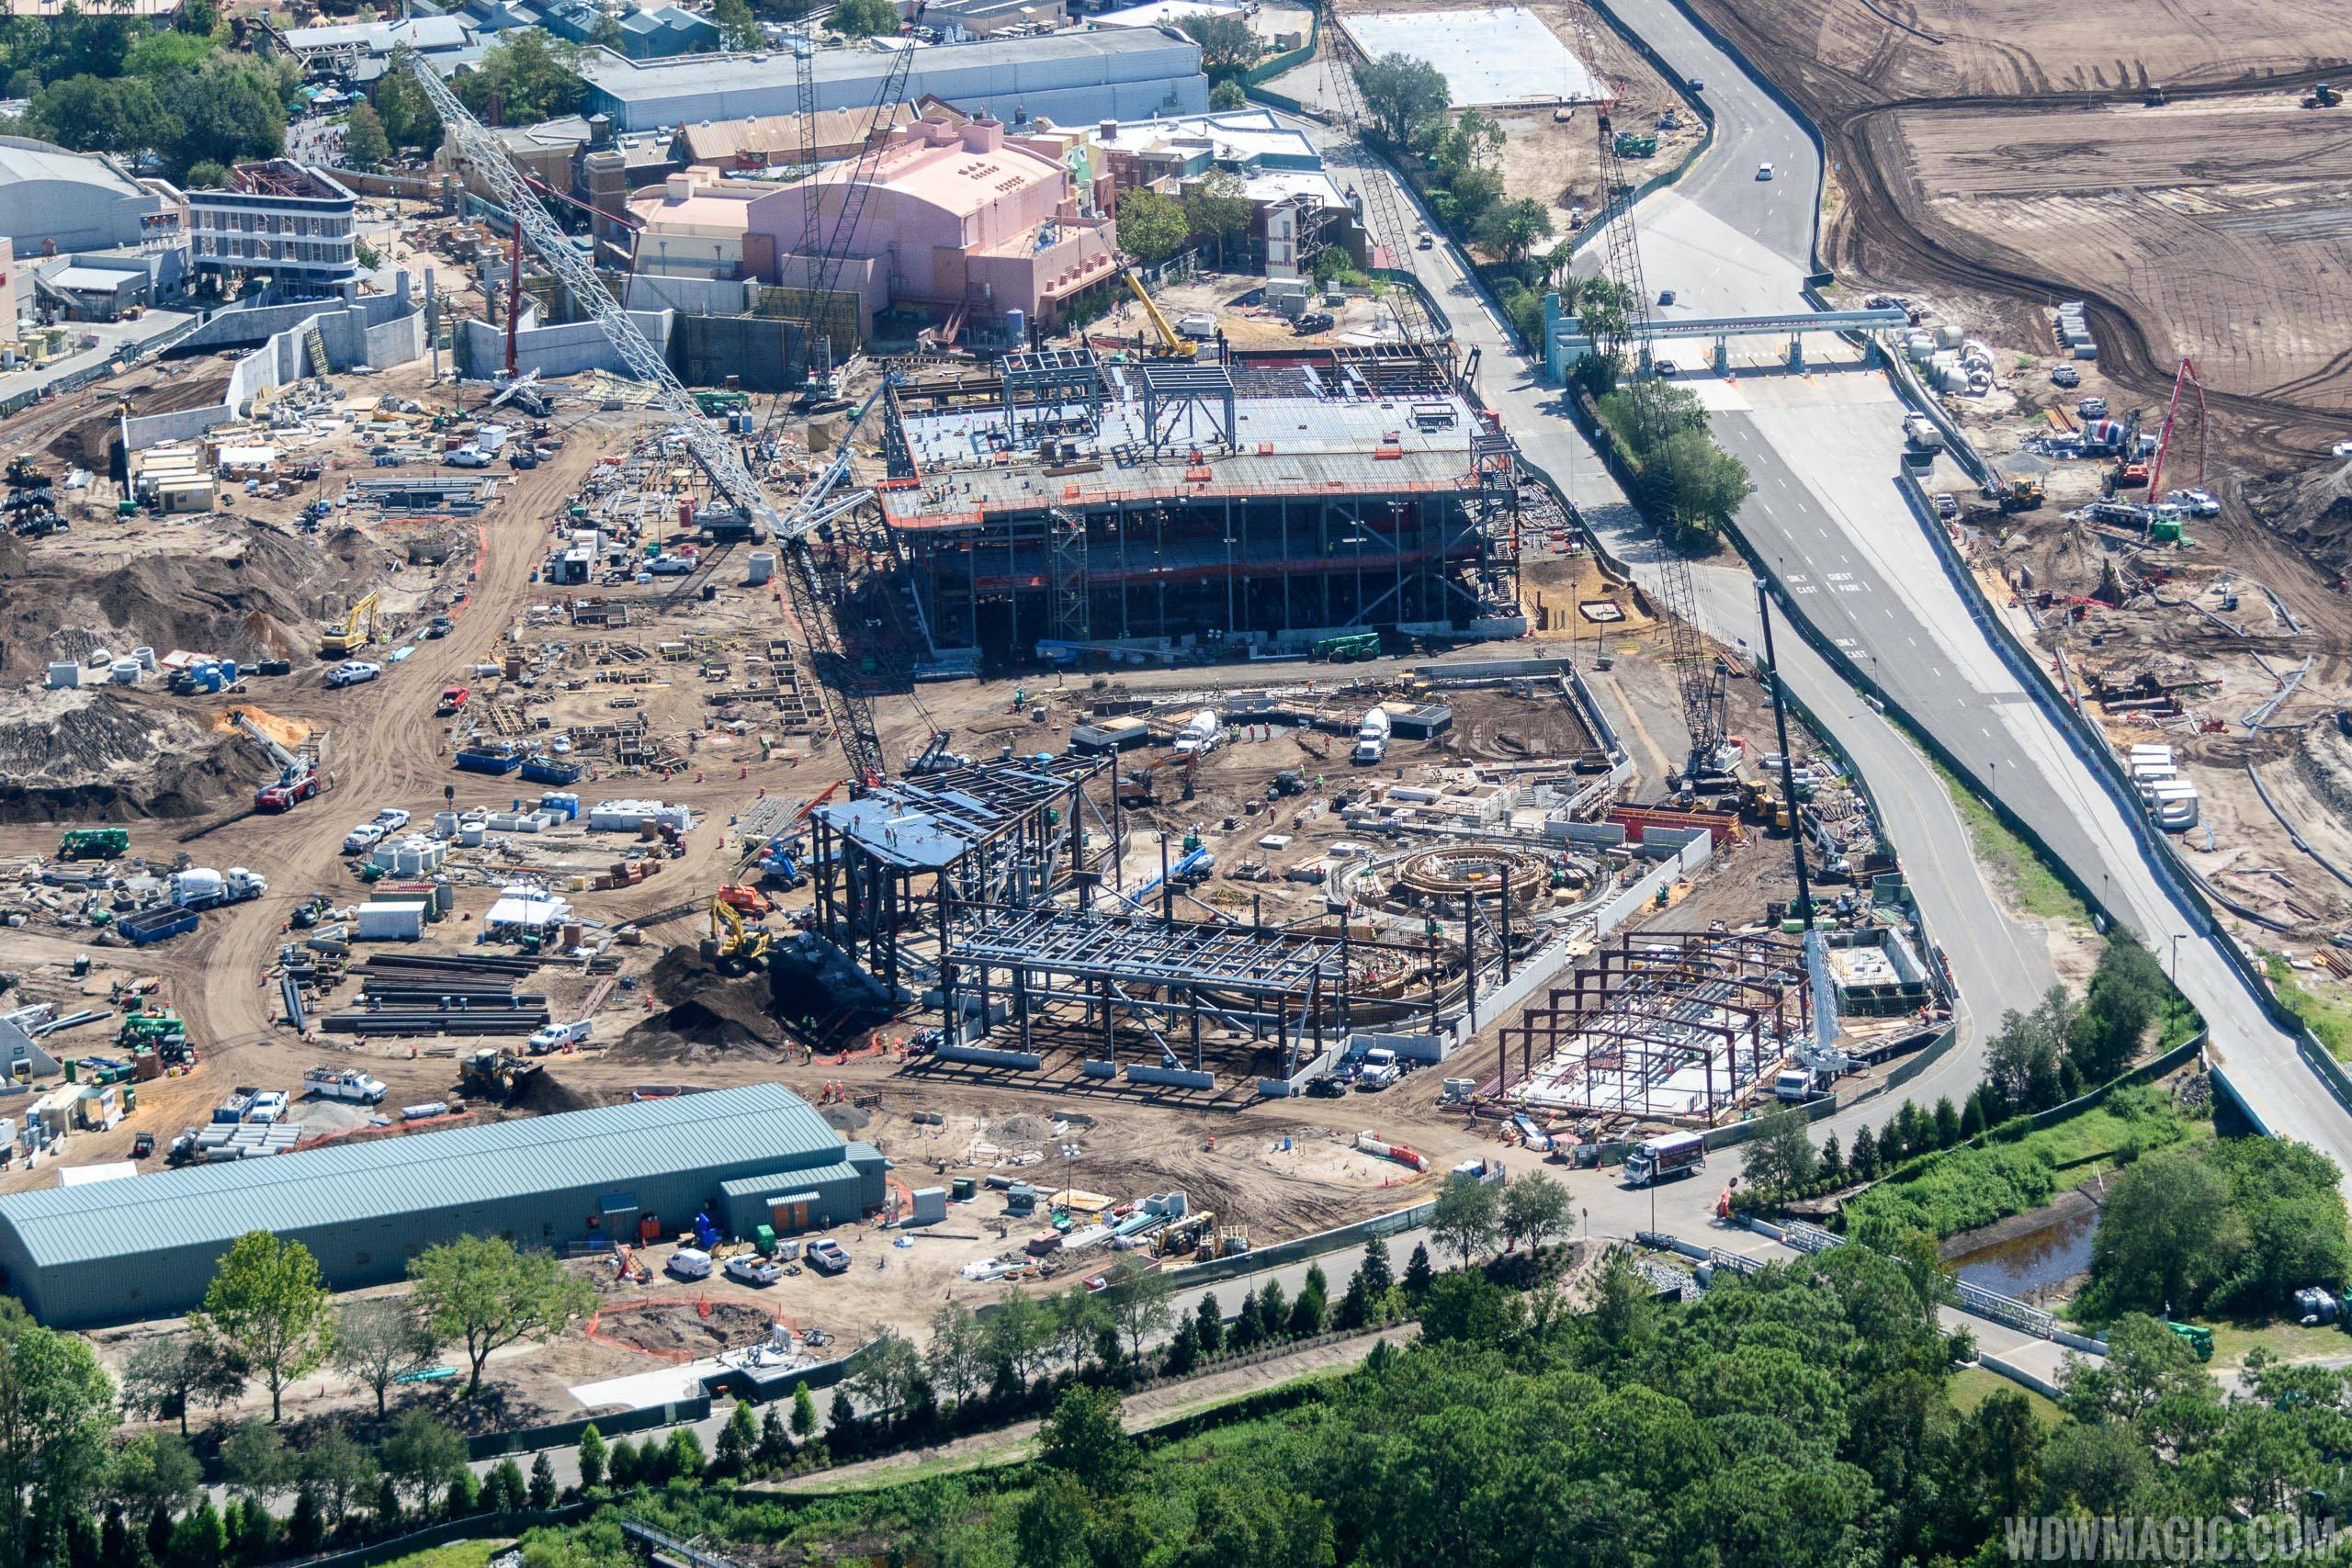 Star Wars Galaxy's Edge aerial view - Millennium Falcon ride in the foreground, Battle Escape ride in the background